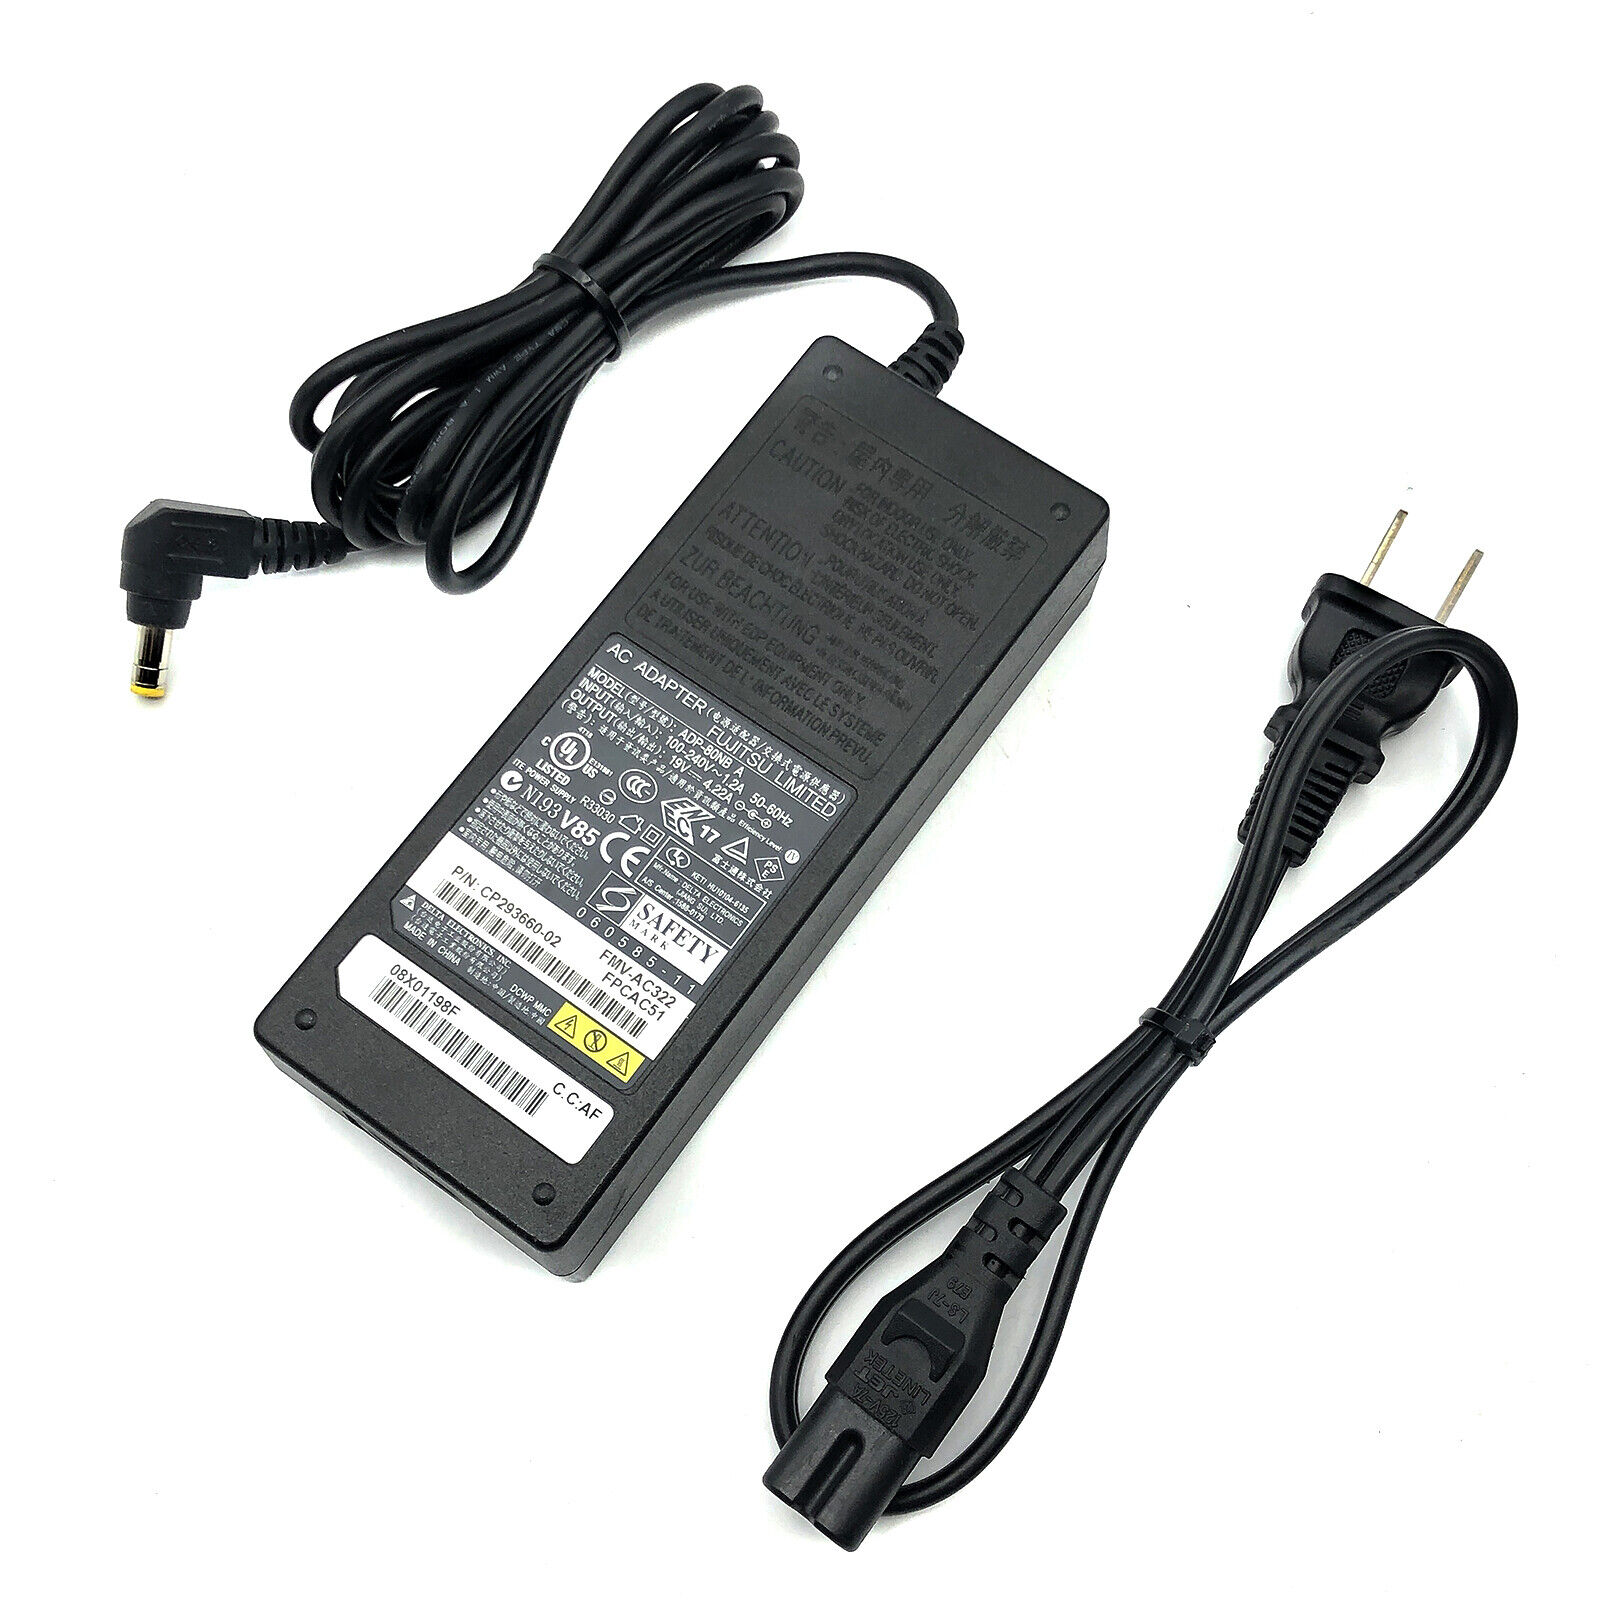 OEM Fujitsu AC Adapter 80W for LifeBook T4210 T4215 T4310 T4410 Laptop Tablet PC